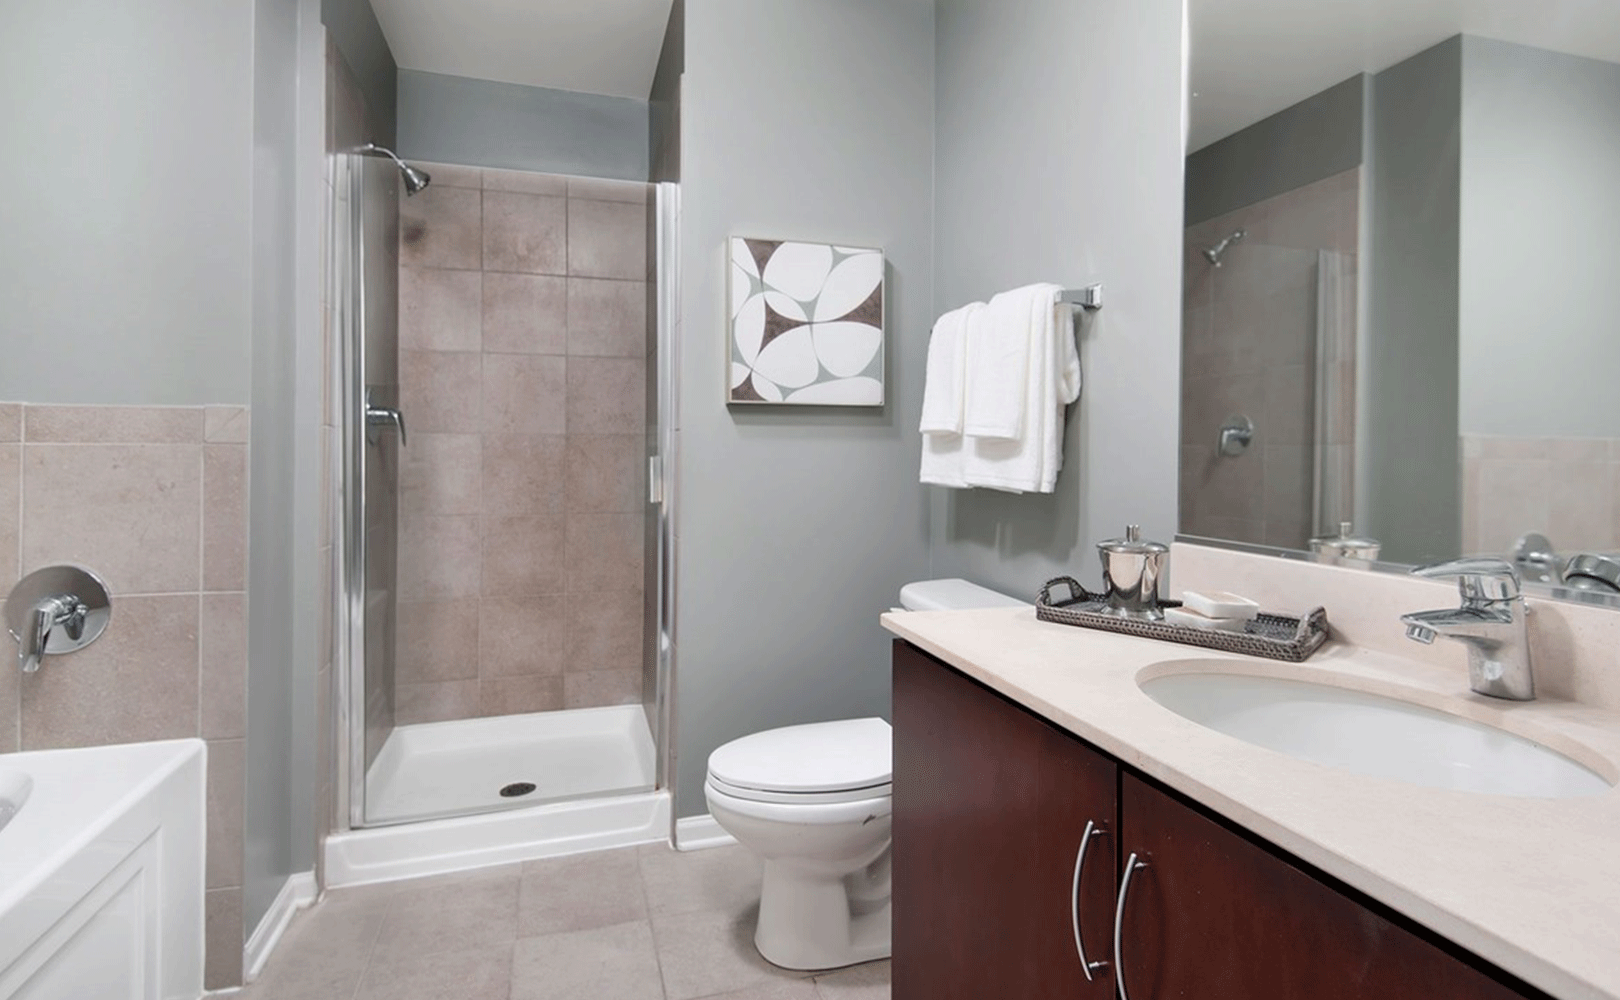 South Loop Chicago apartment bathroom with granite counter tops and walk-in shower